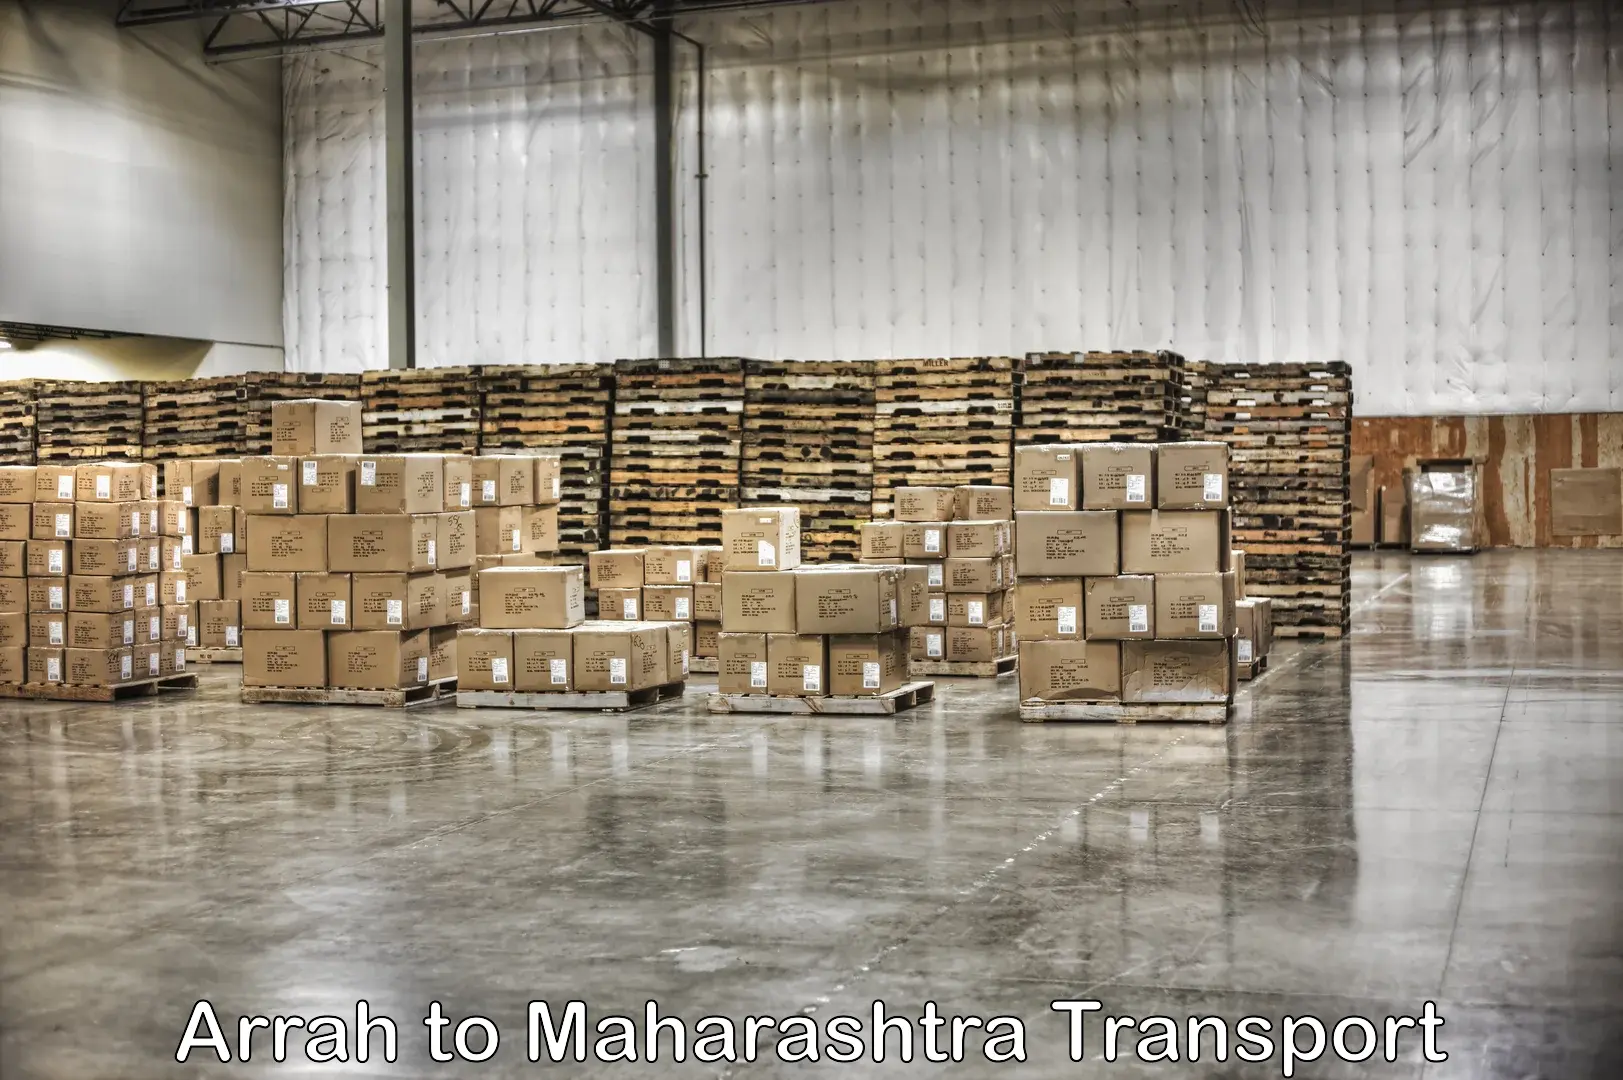 Truck transport companies in India Arrah to Thane